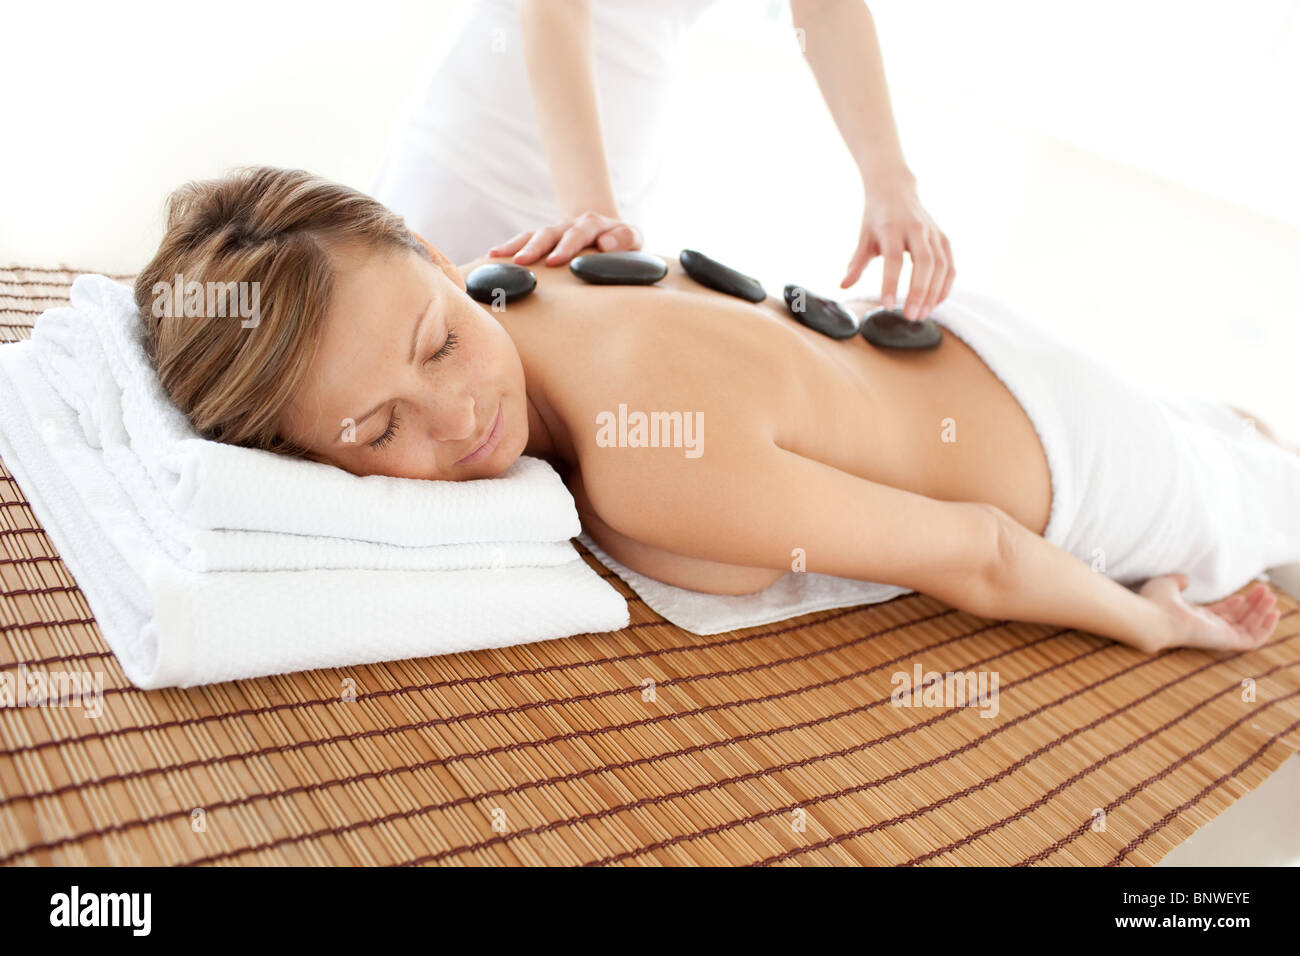 Delighted woman lying on a massage table Stock Photo